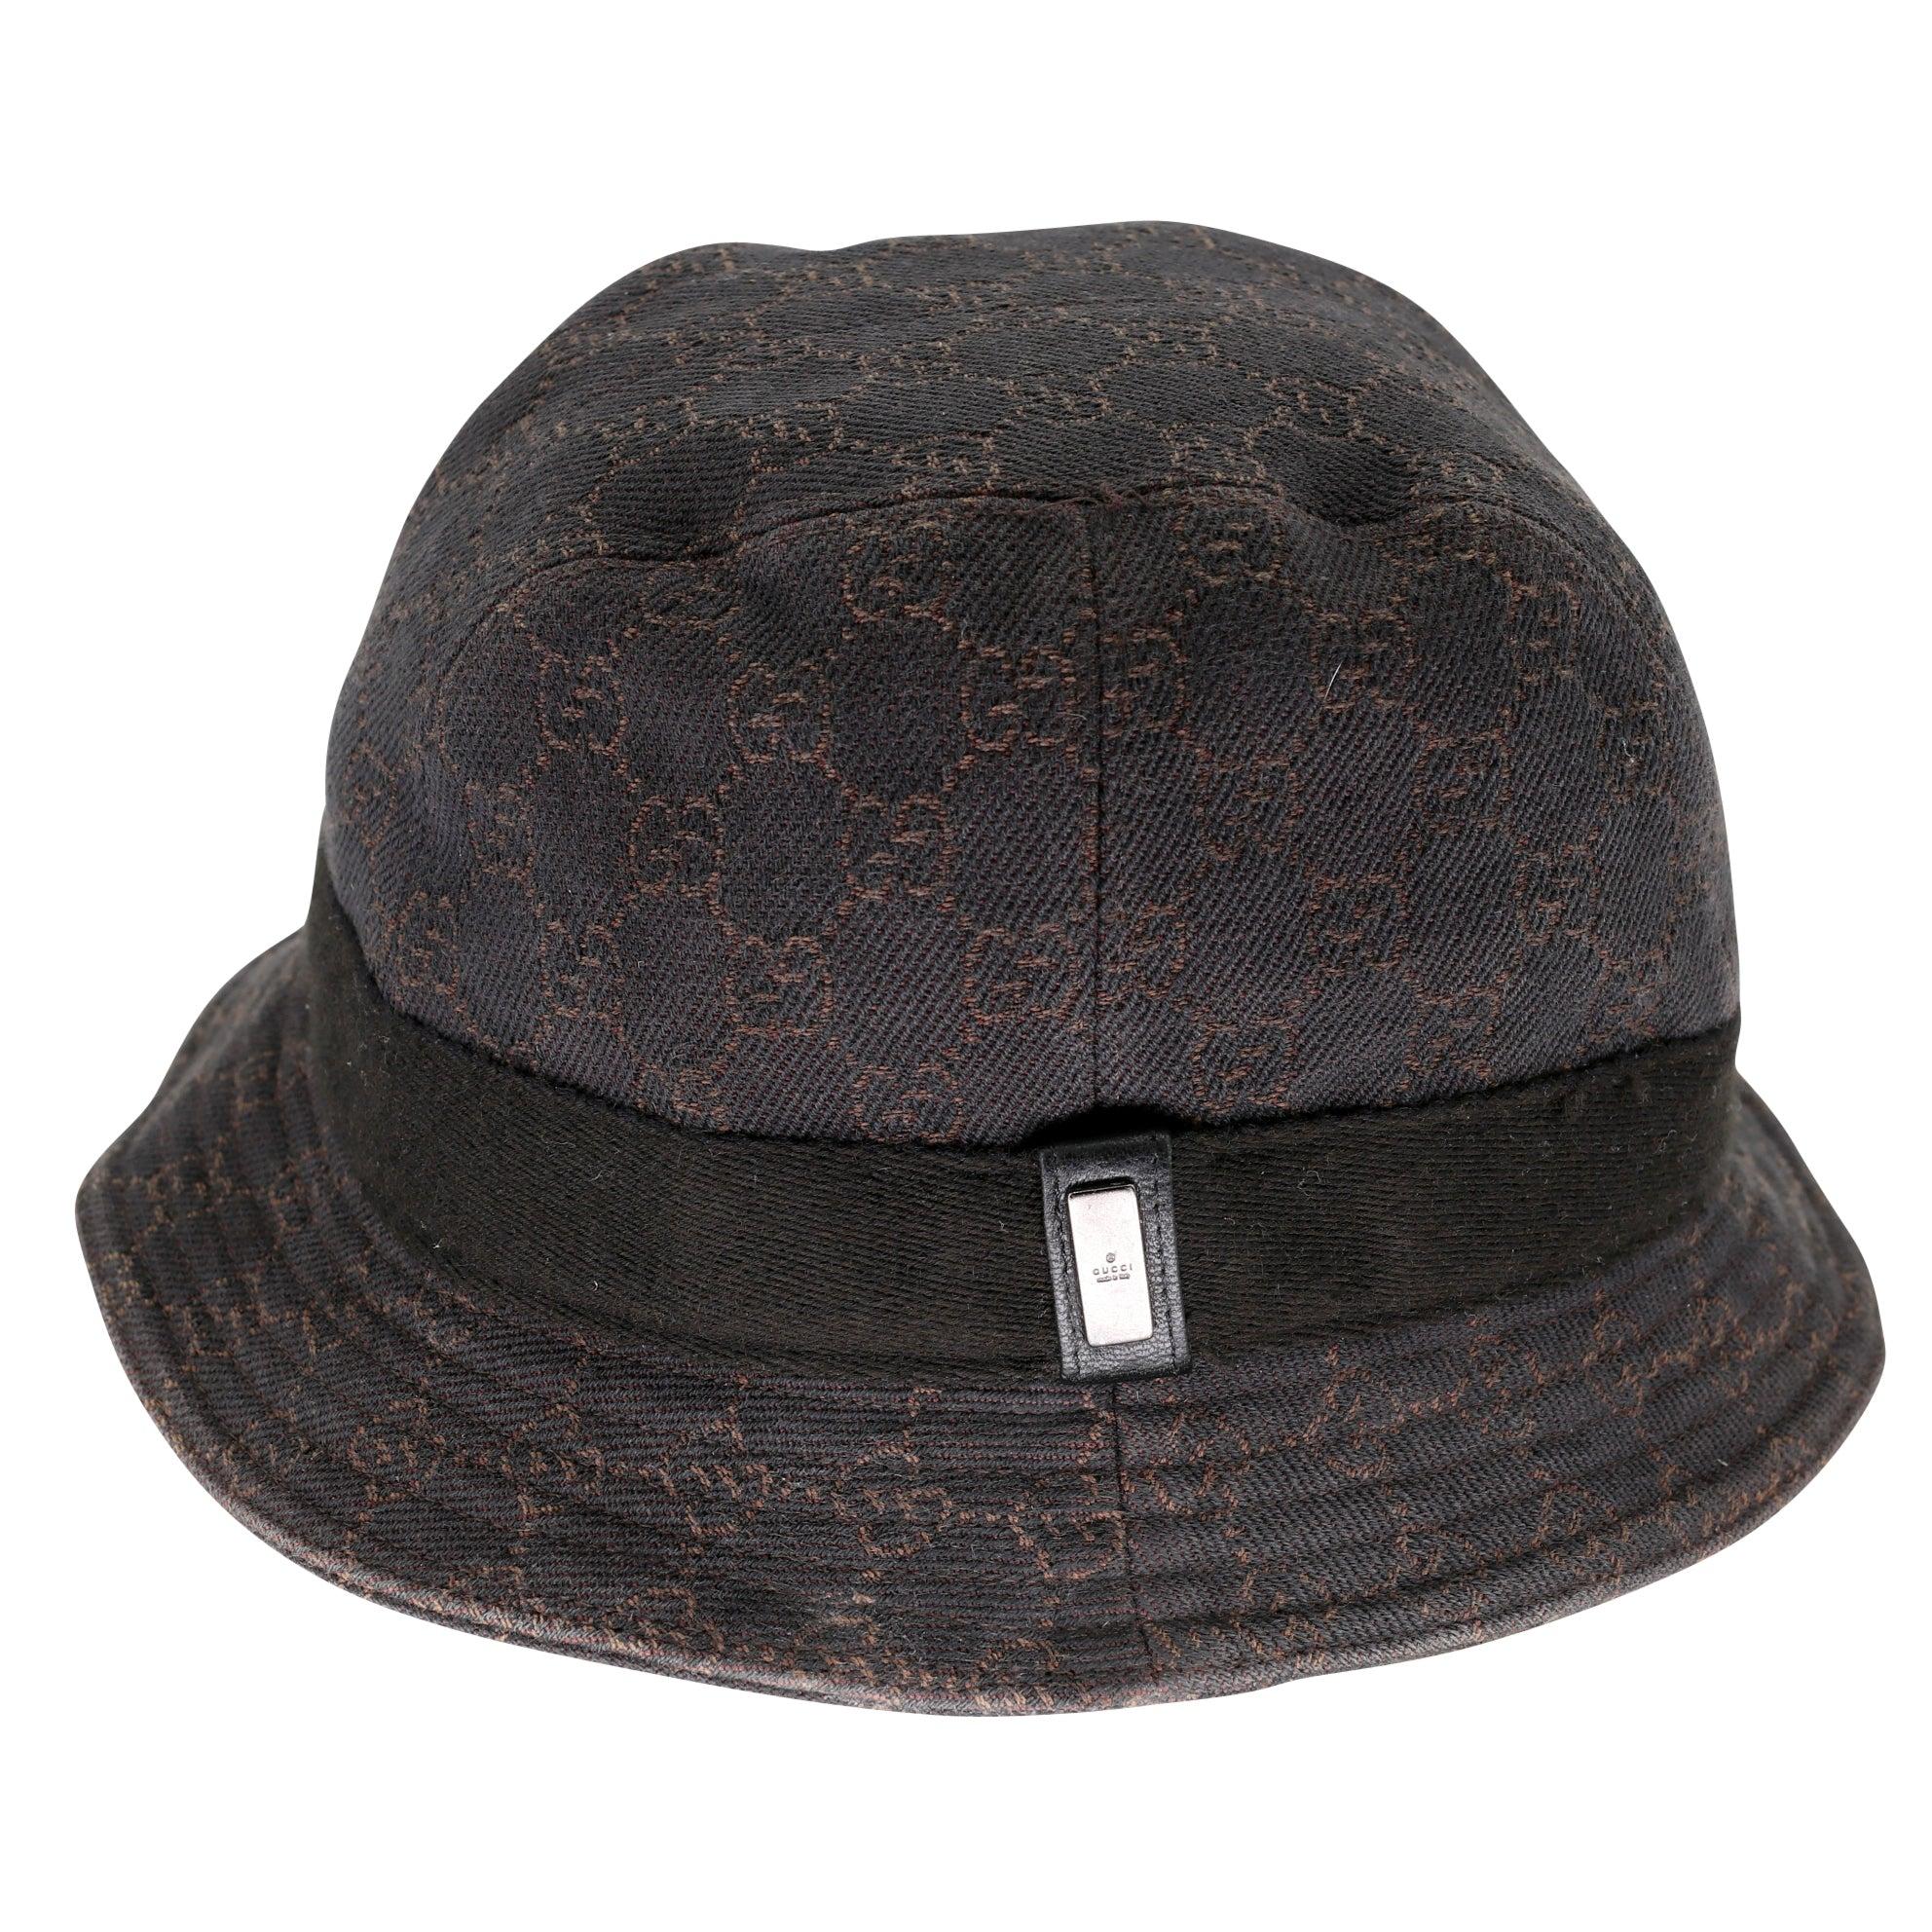 Gucci signature GG monogram bucket hat perfect for daily use and unisex update your wardrobe with this must have accessory.  This timeless item is used with basic wear includes discoloration from daily use and being washed and stored.

Item